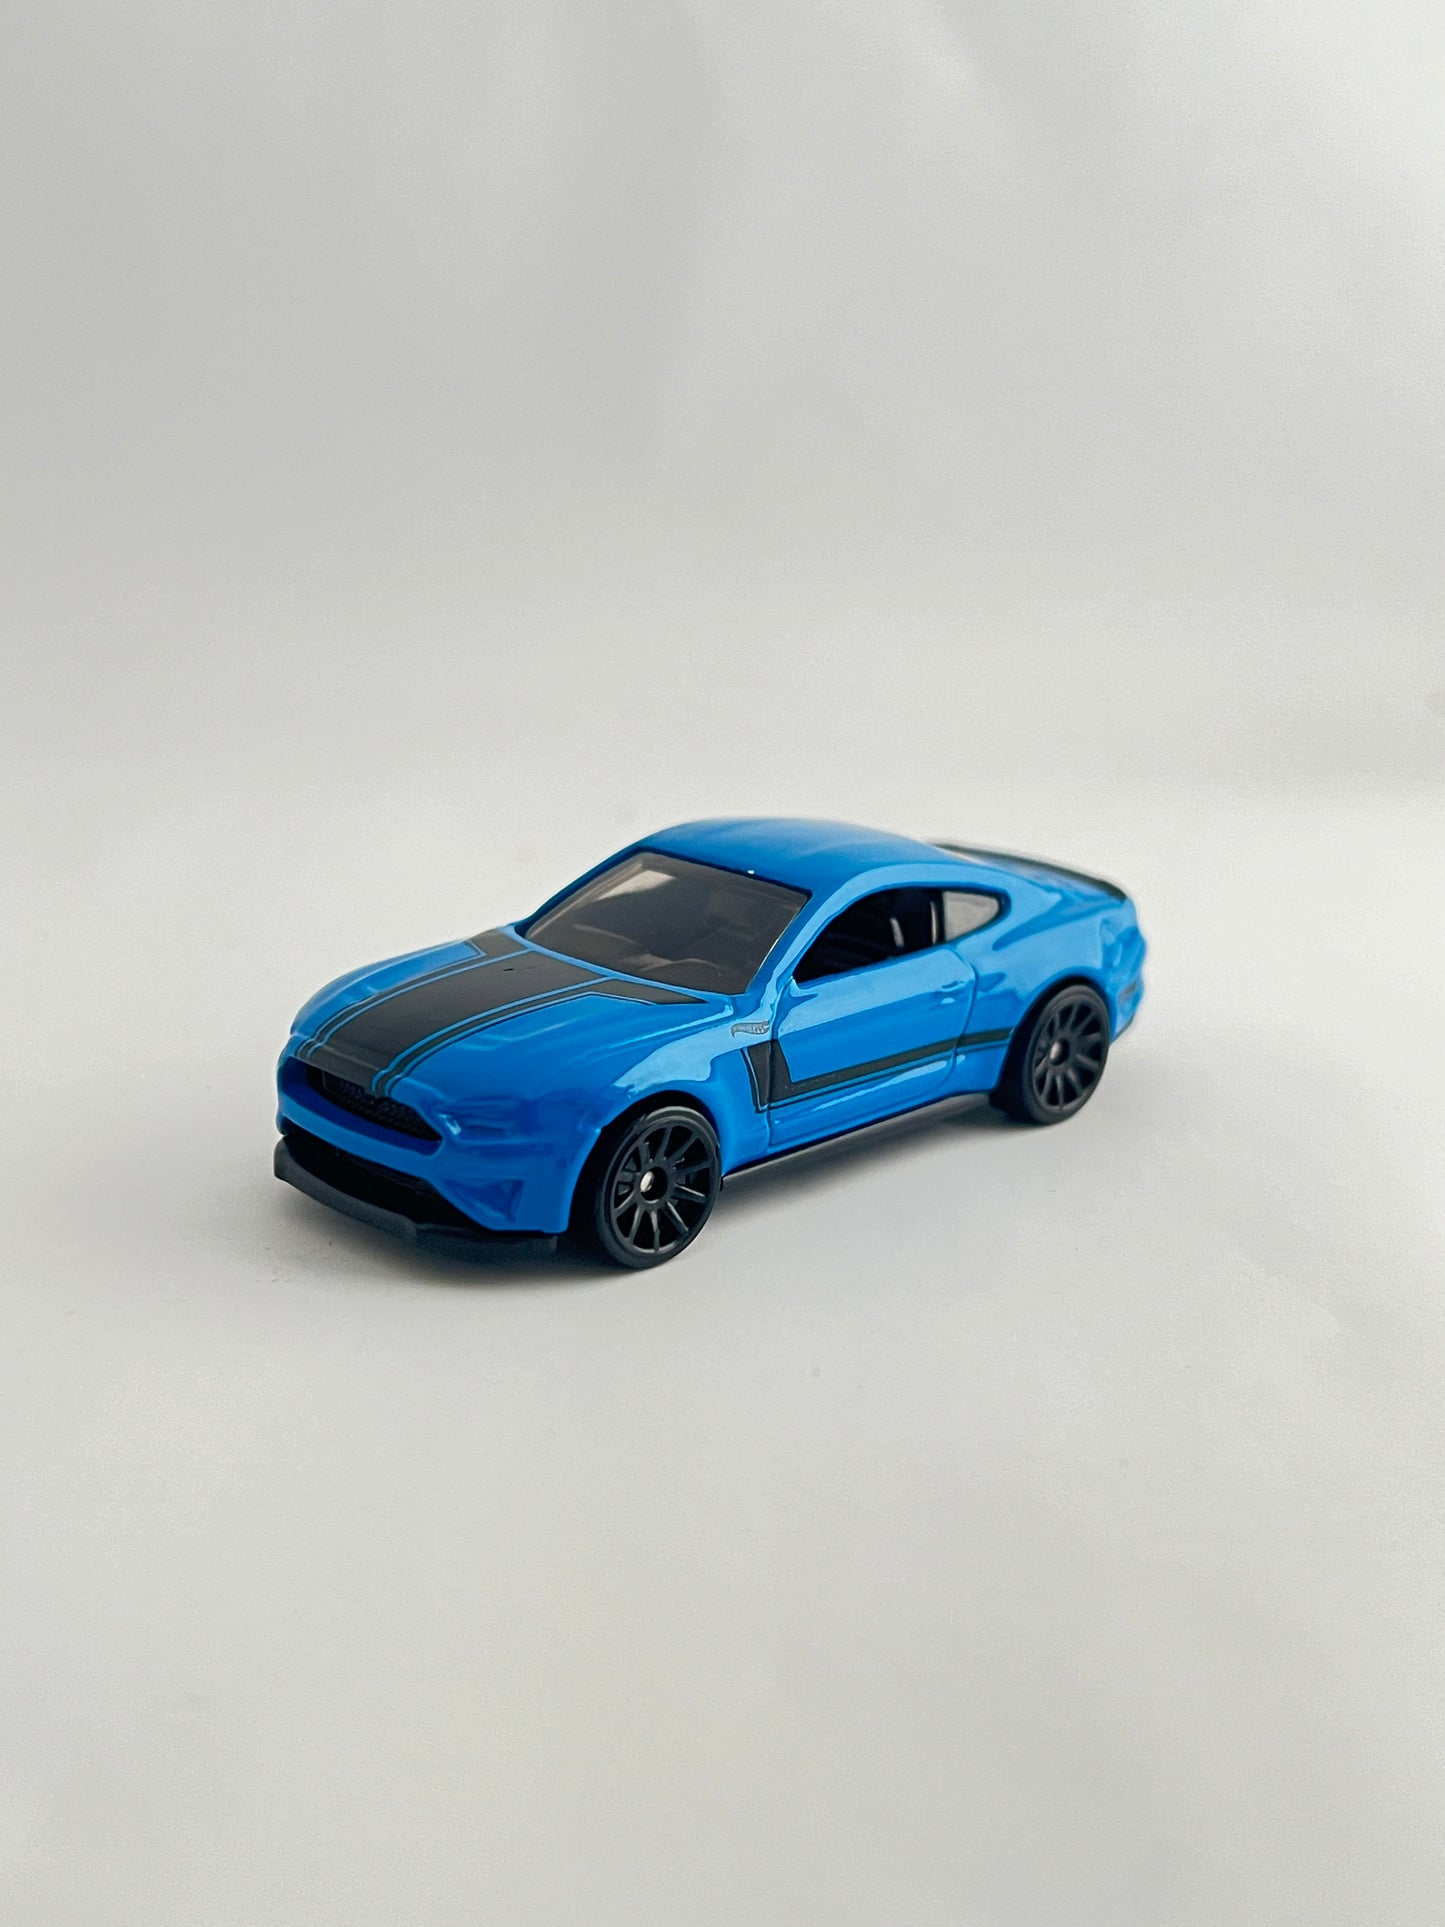 2018 F0RD MUSTANG GT- UNCARDED - MINT CONDITION